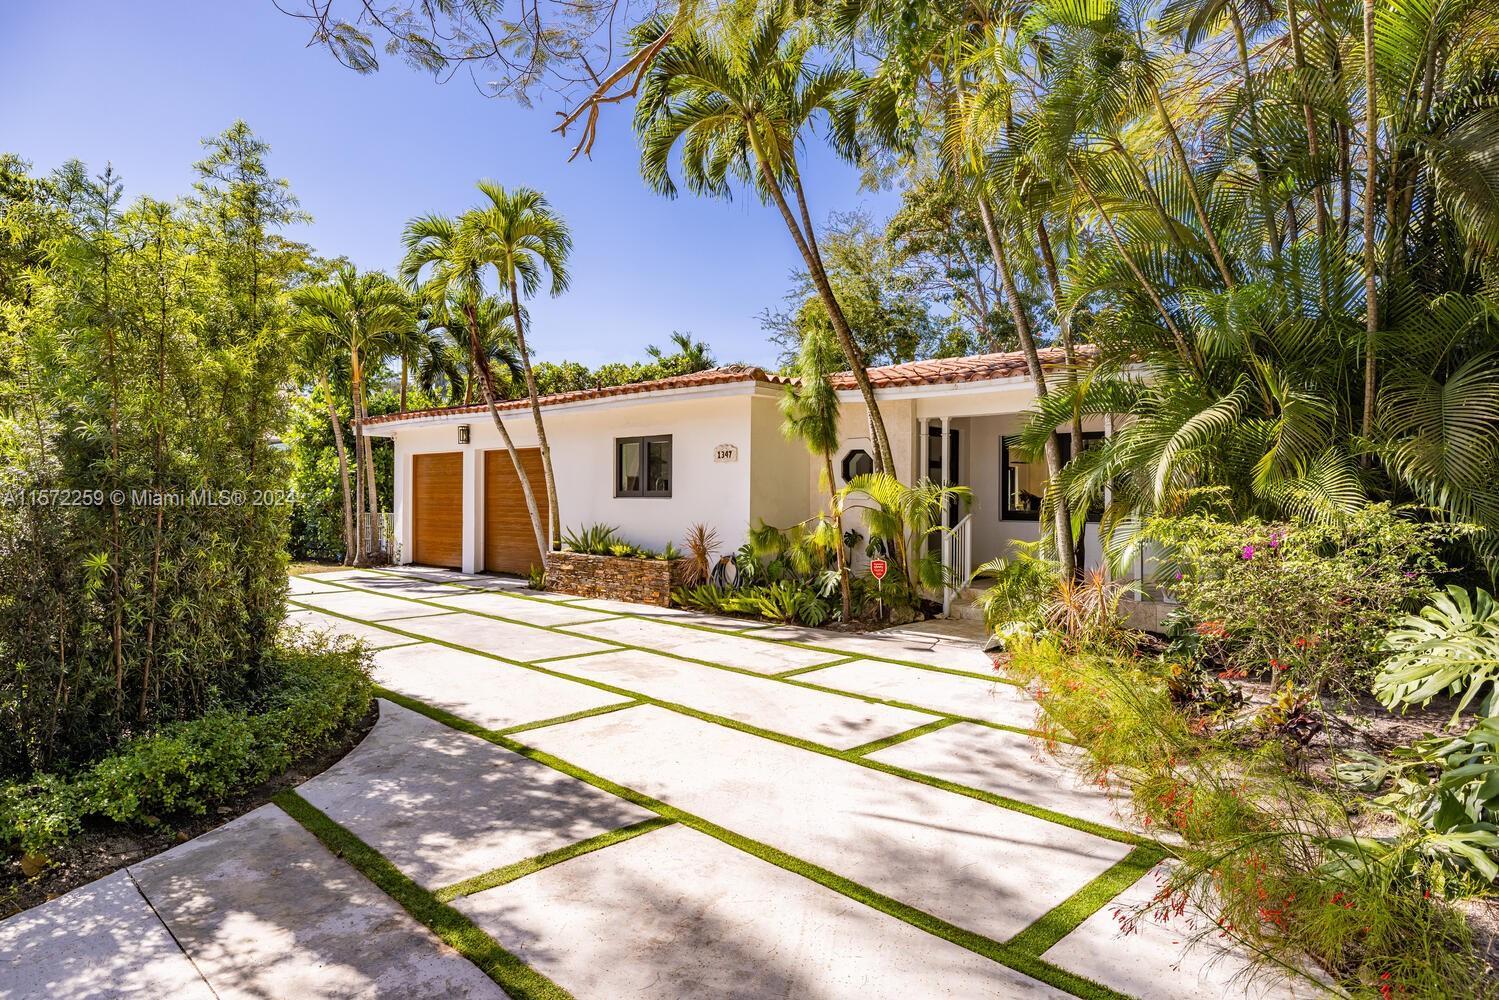 Welcome to your dream and Smart home in the heart of Coral Gables! This exquisite property offers th